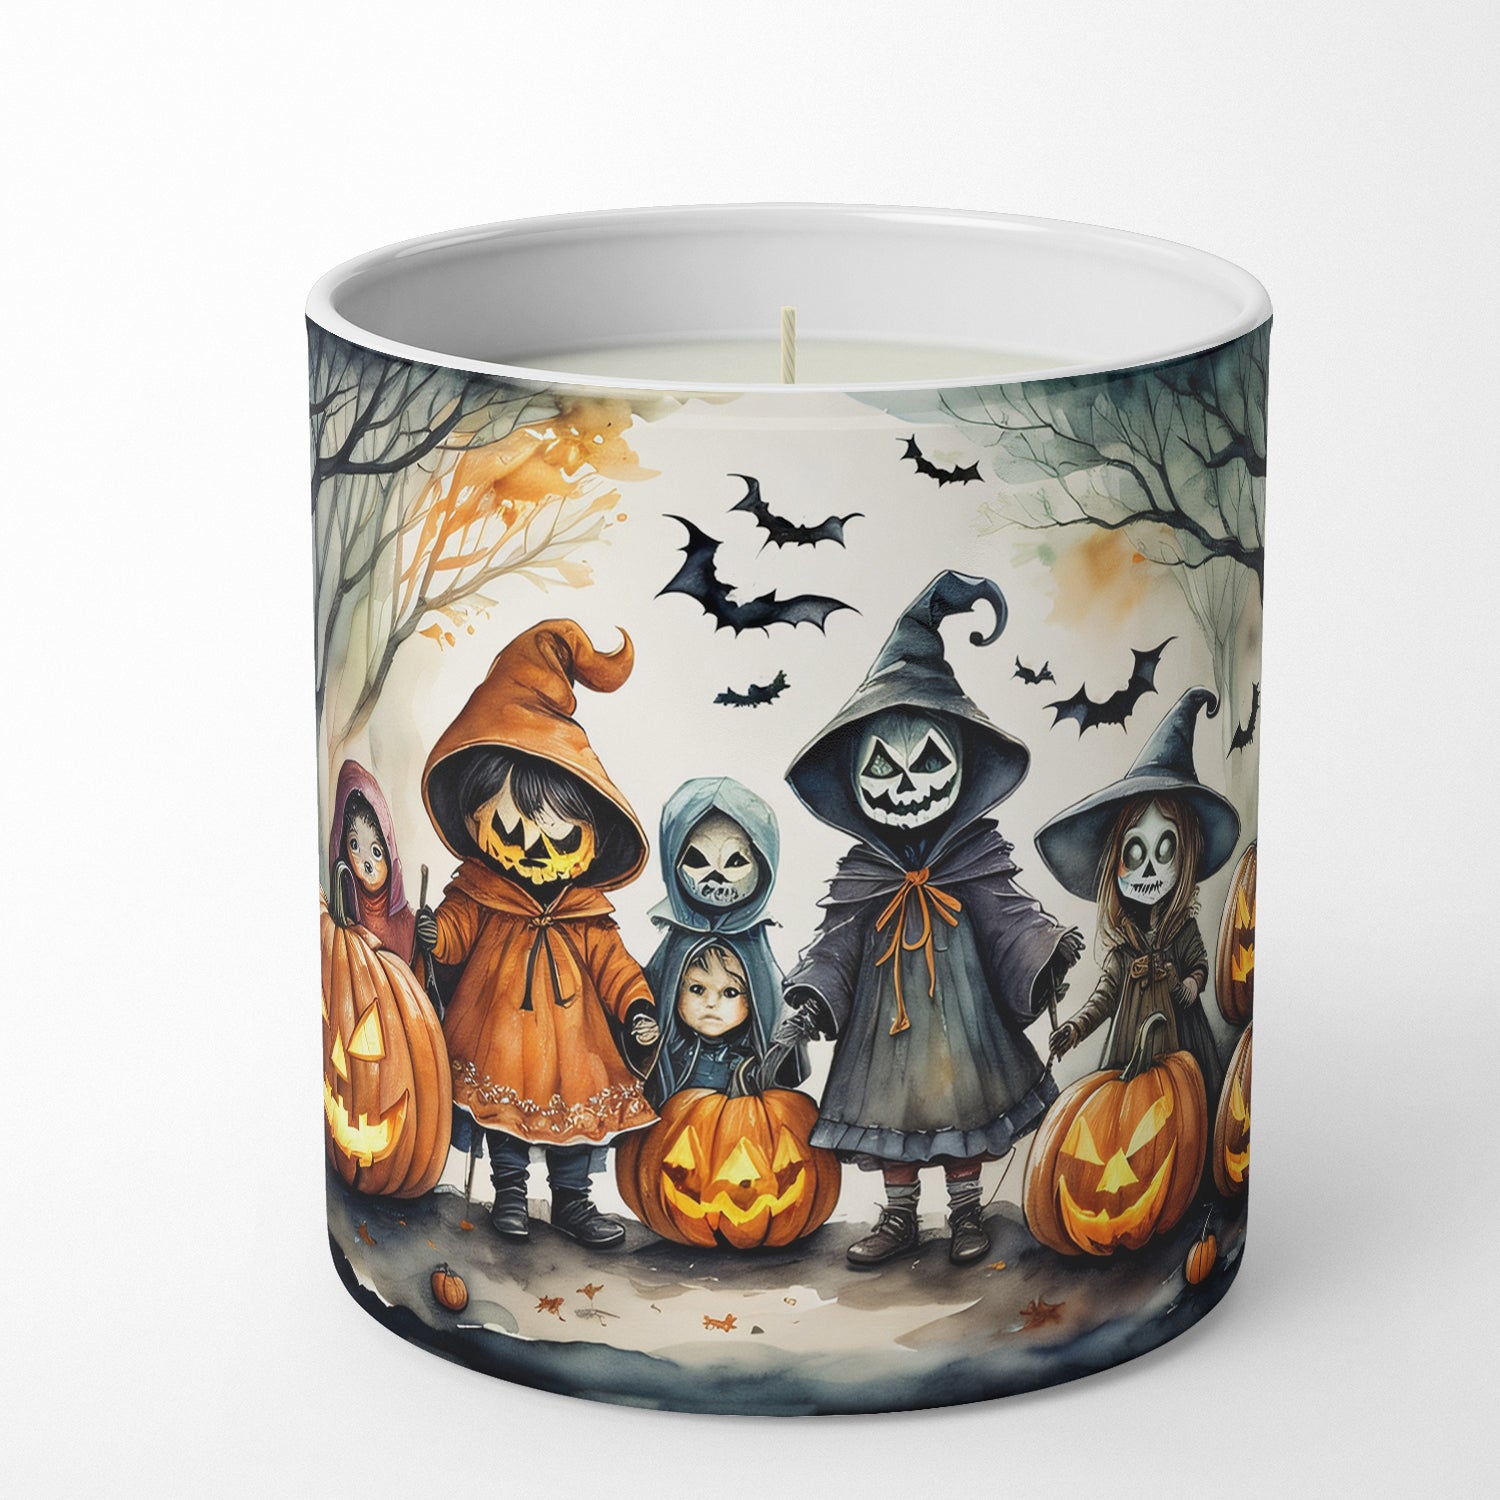 Buy this Trick or Treaters Spooky Halloween Decorative Soy Candle